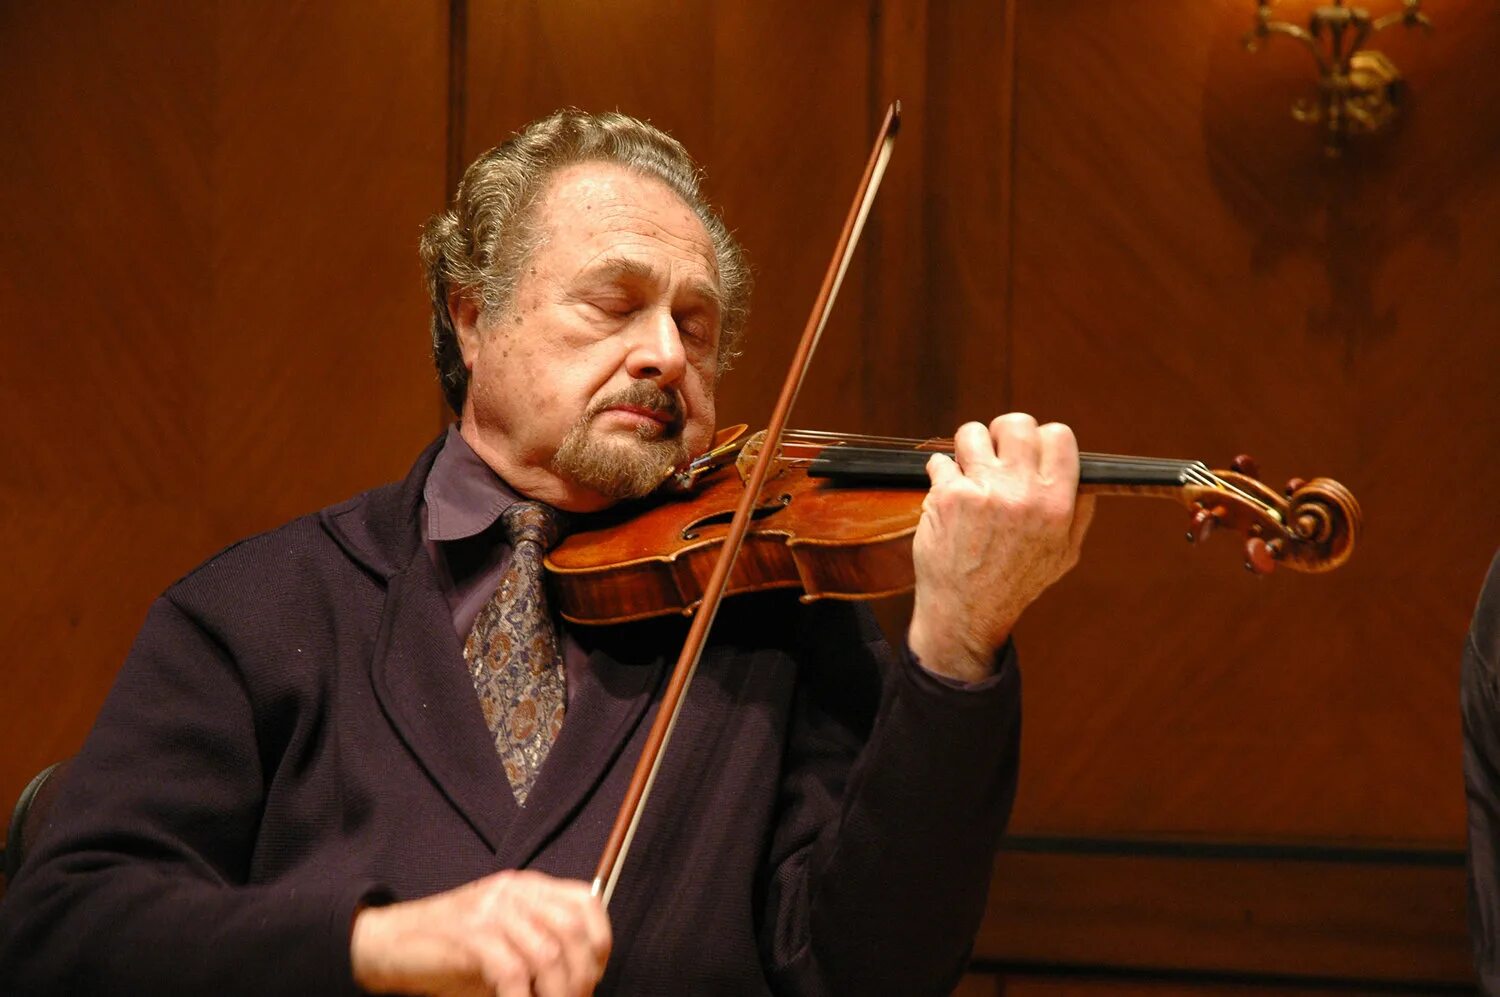 He plays the violin better. Famous Violinist. Violinist.